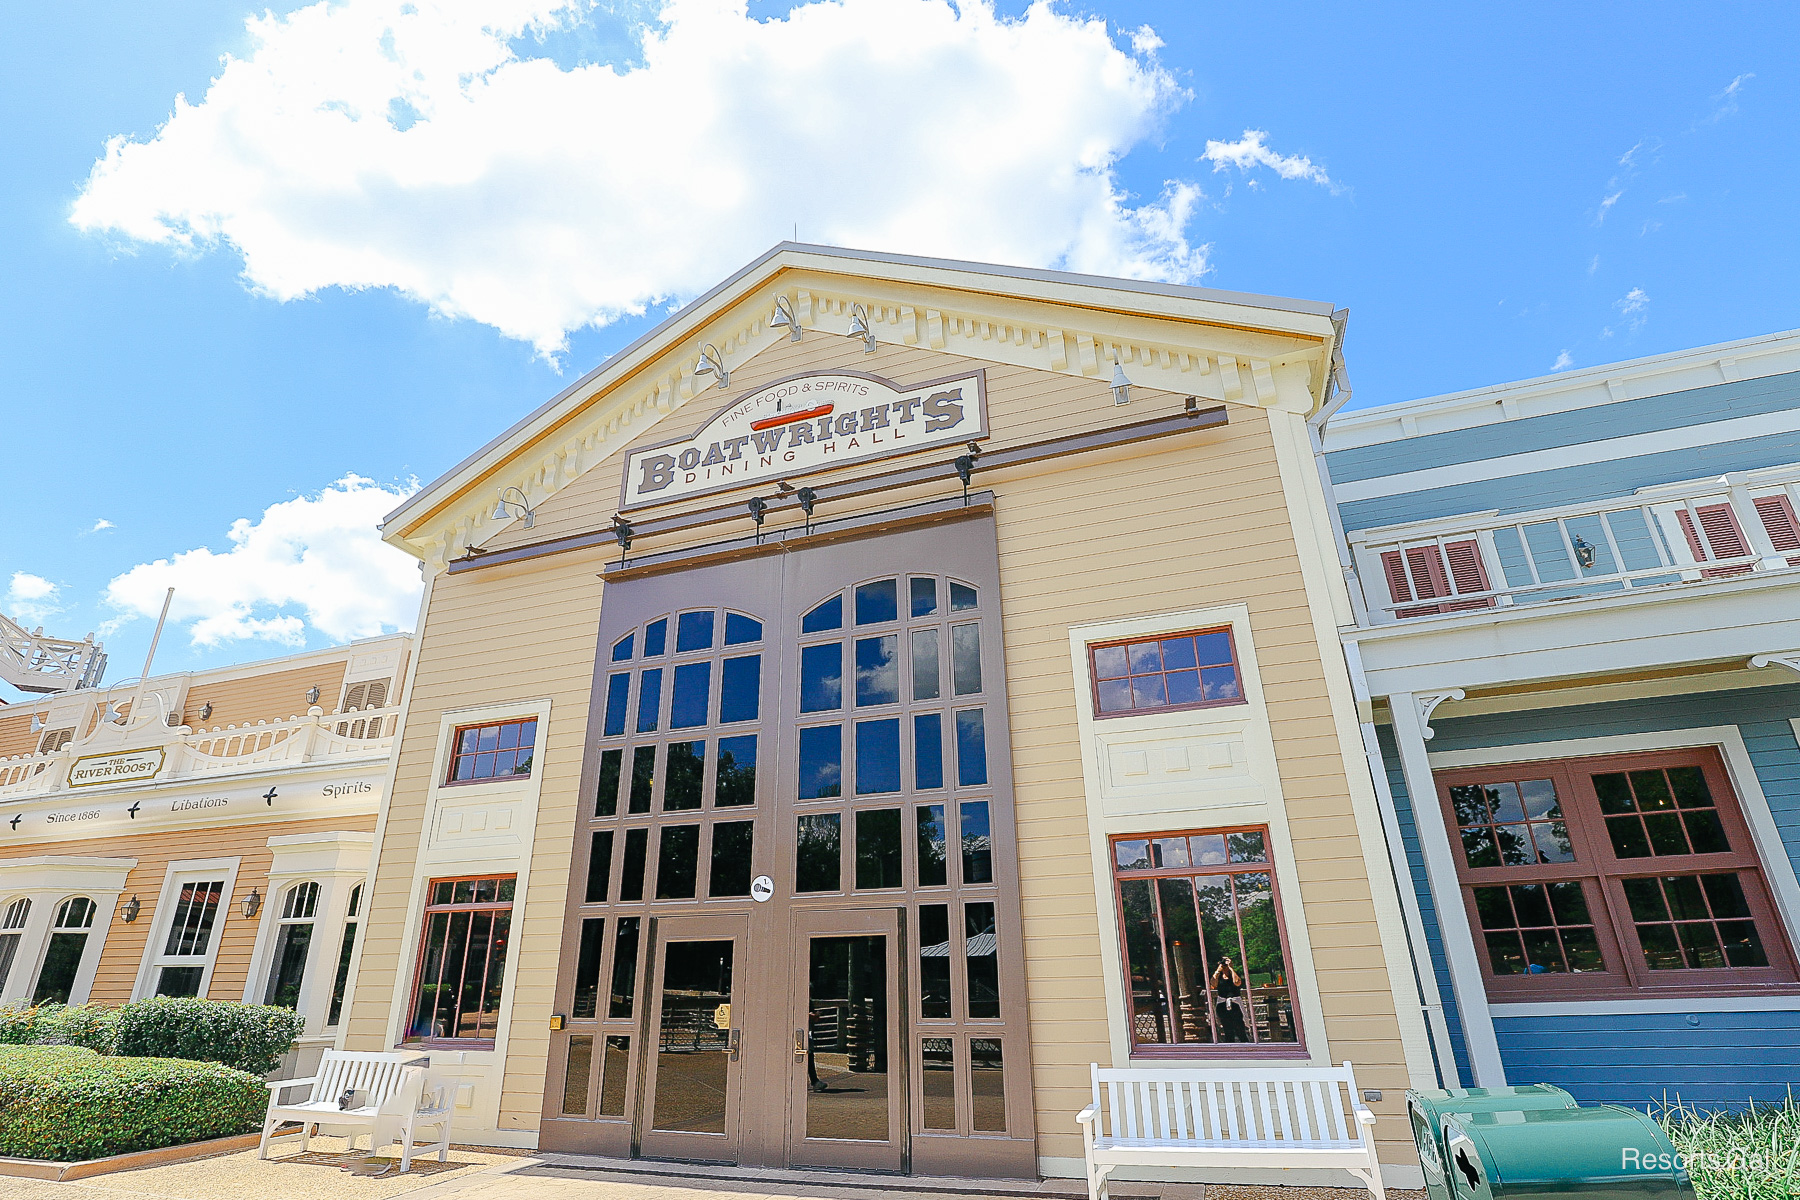 Boatwrights is a tall two-story building with tan paint and brown trim with red accents 